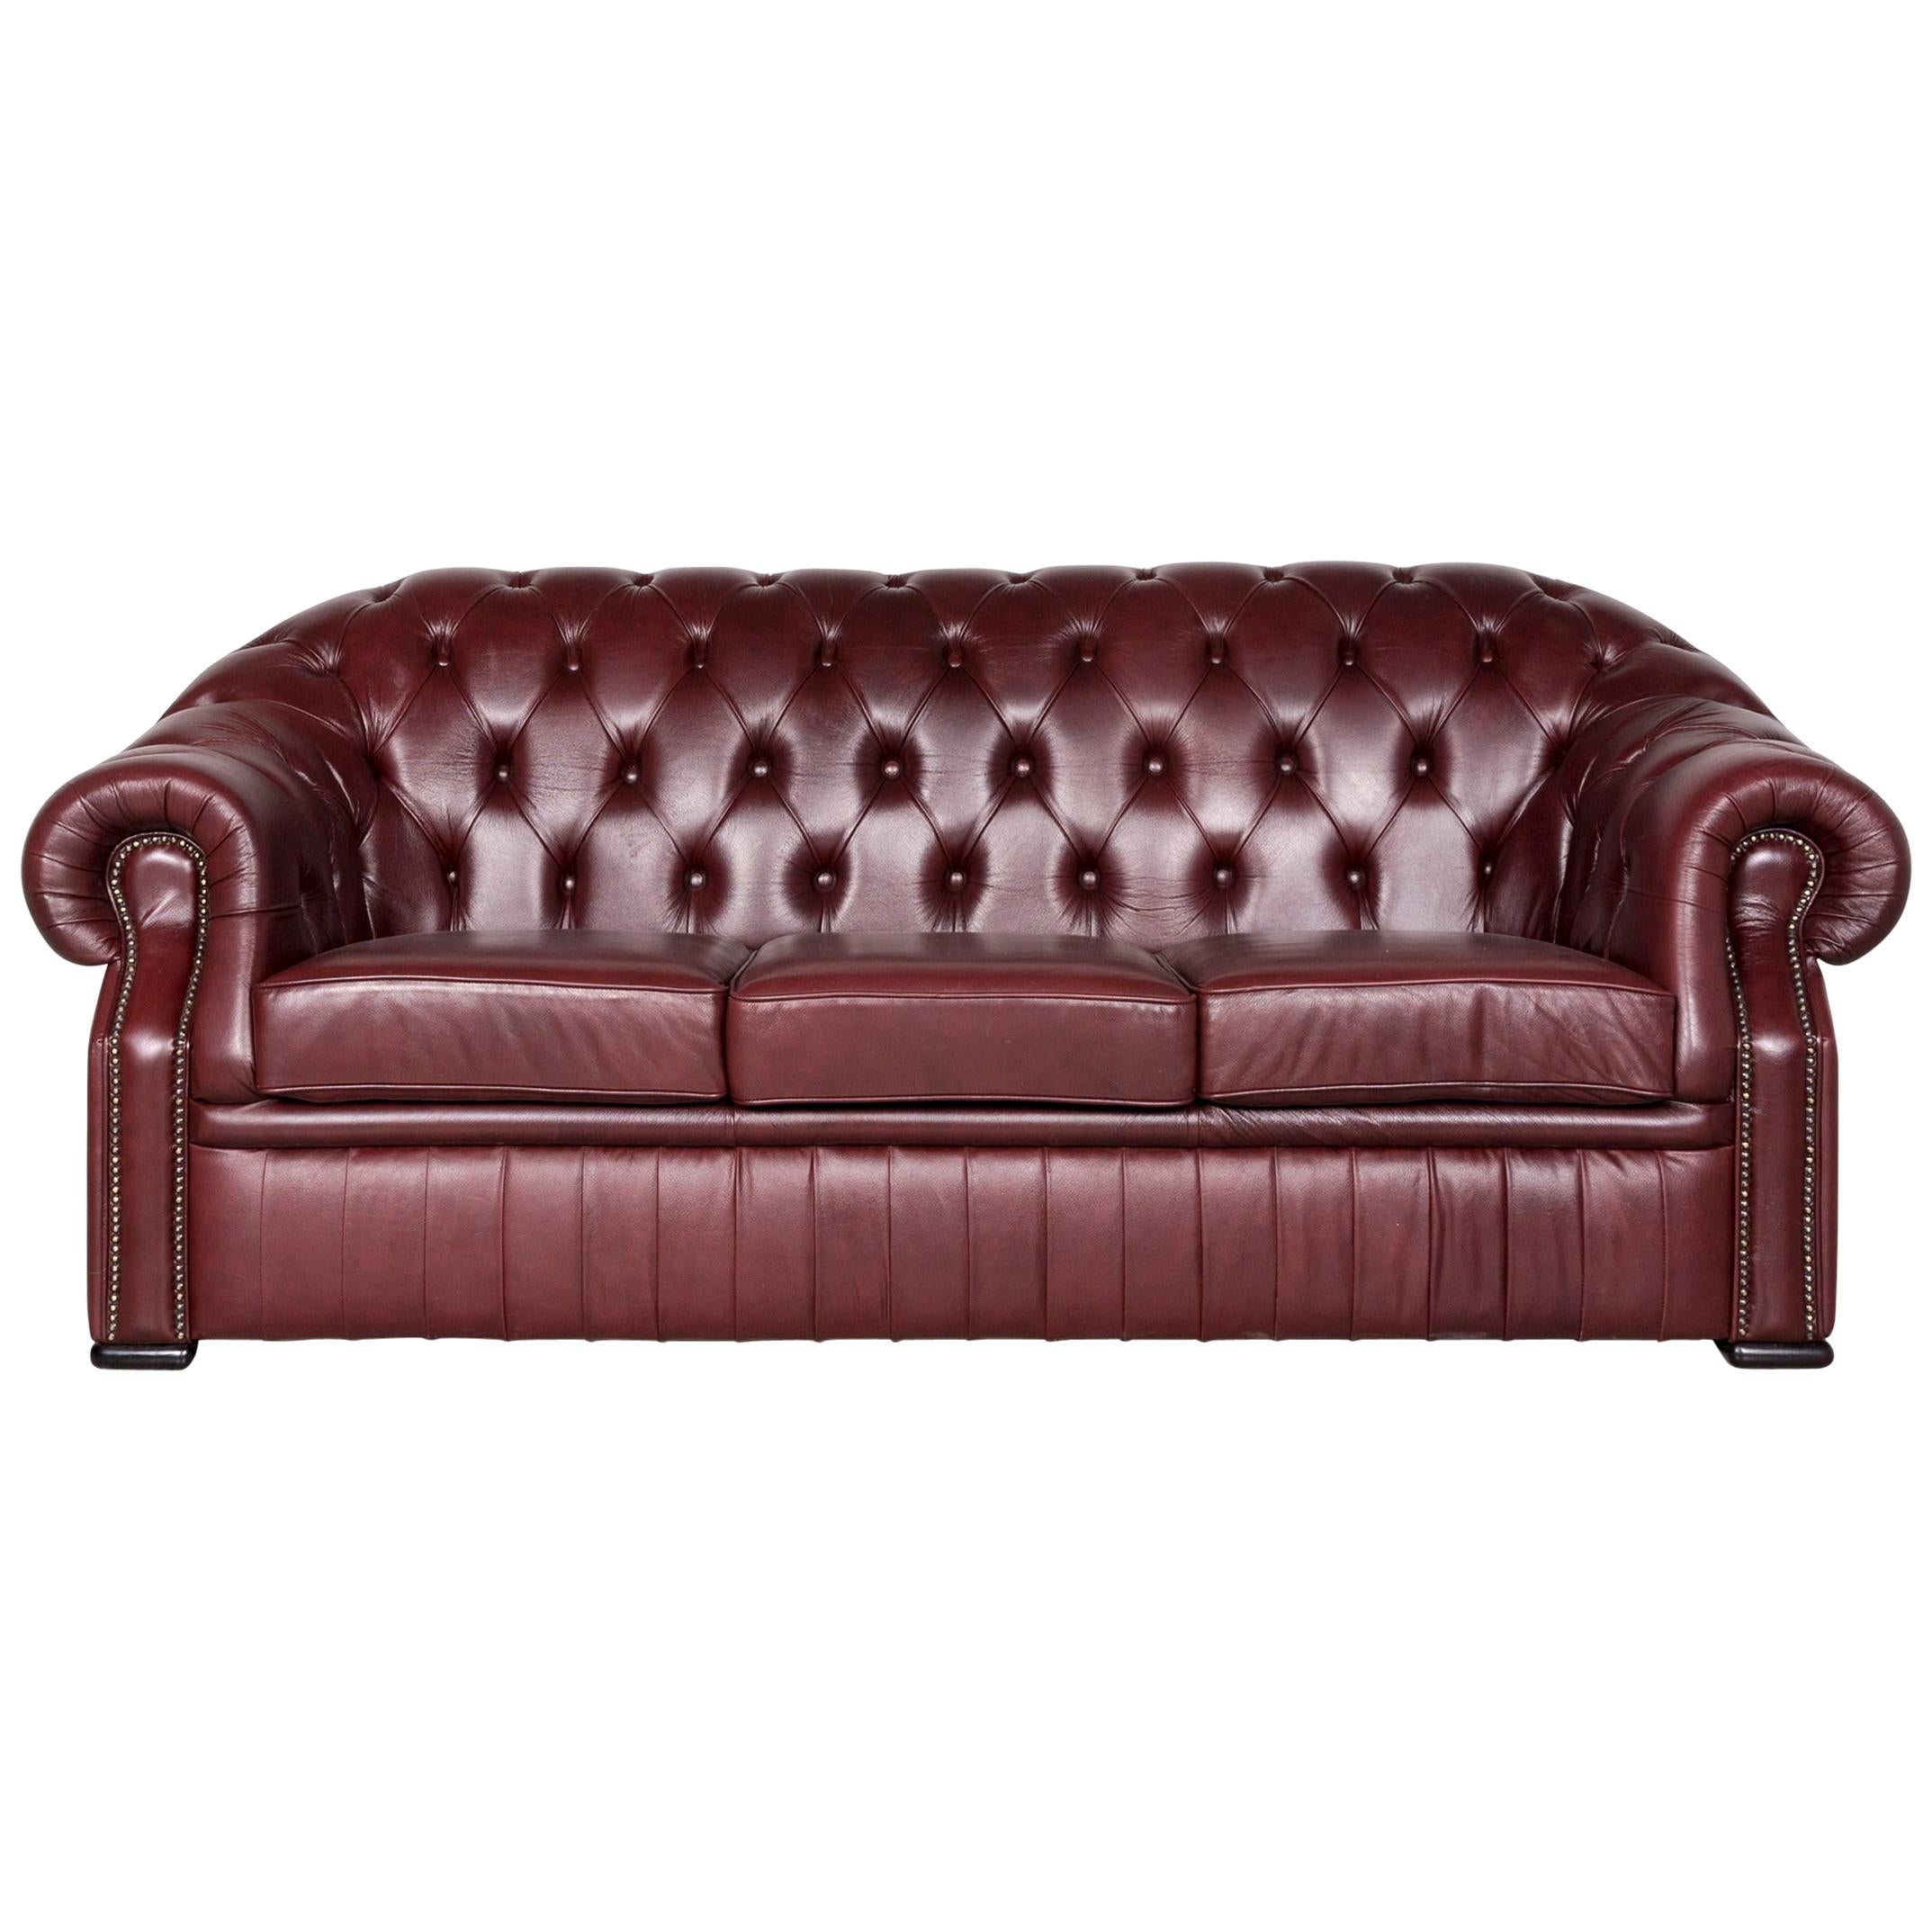 Chesterfield Leather Sofa Red Genuine Leather Three-Seater Couch Vintage Retro For Sale